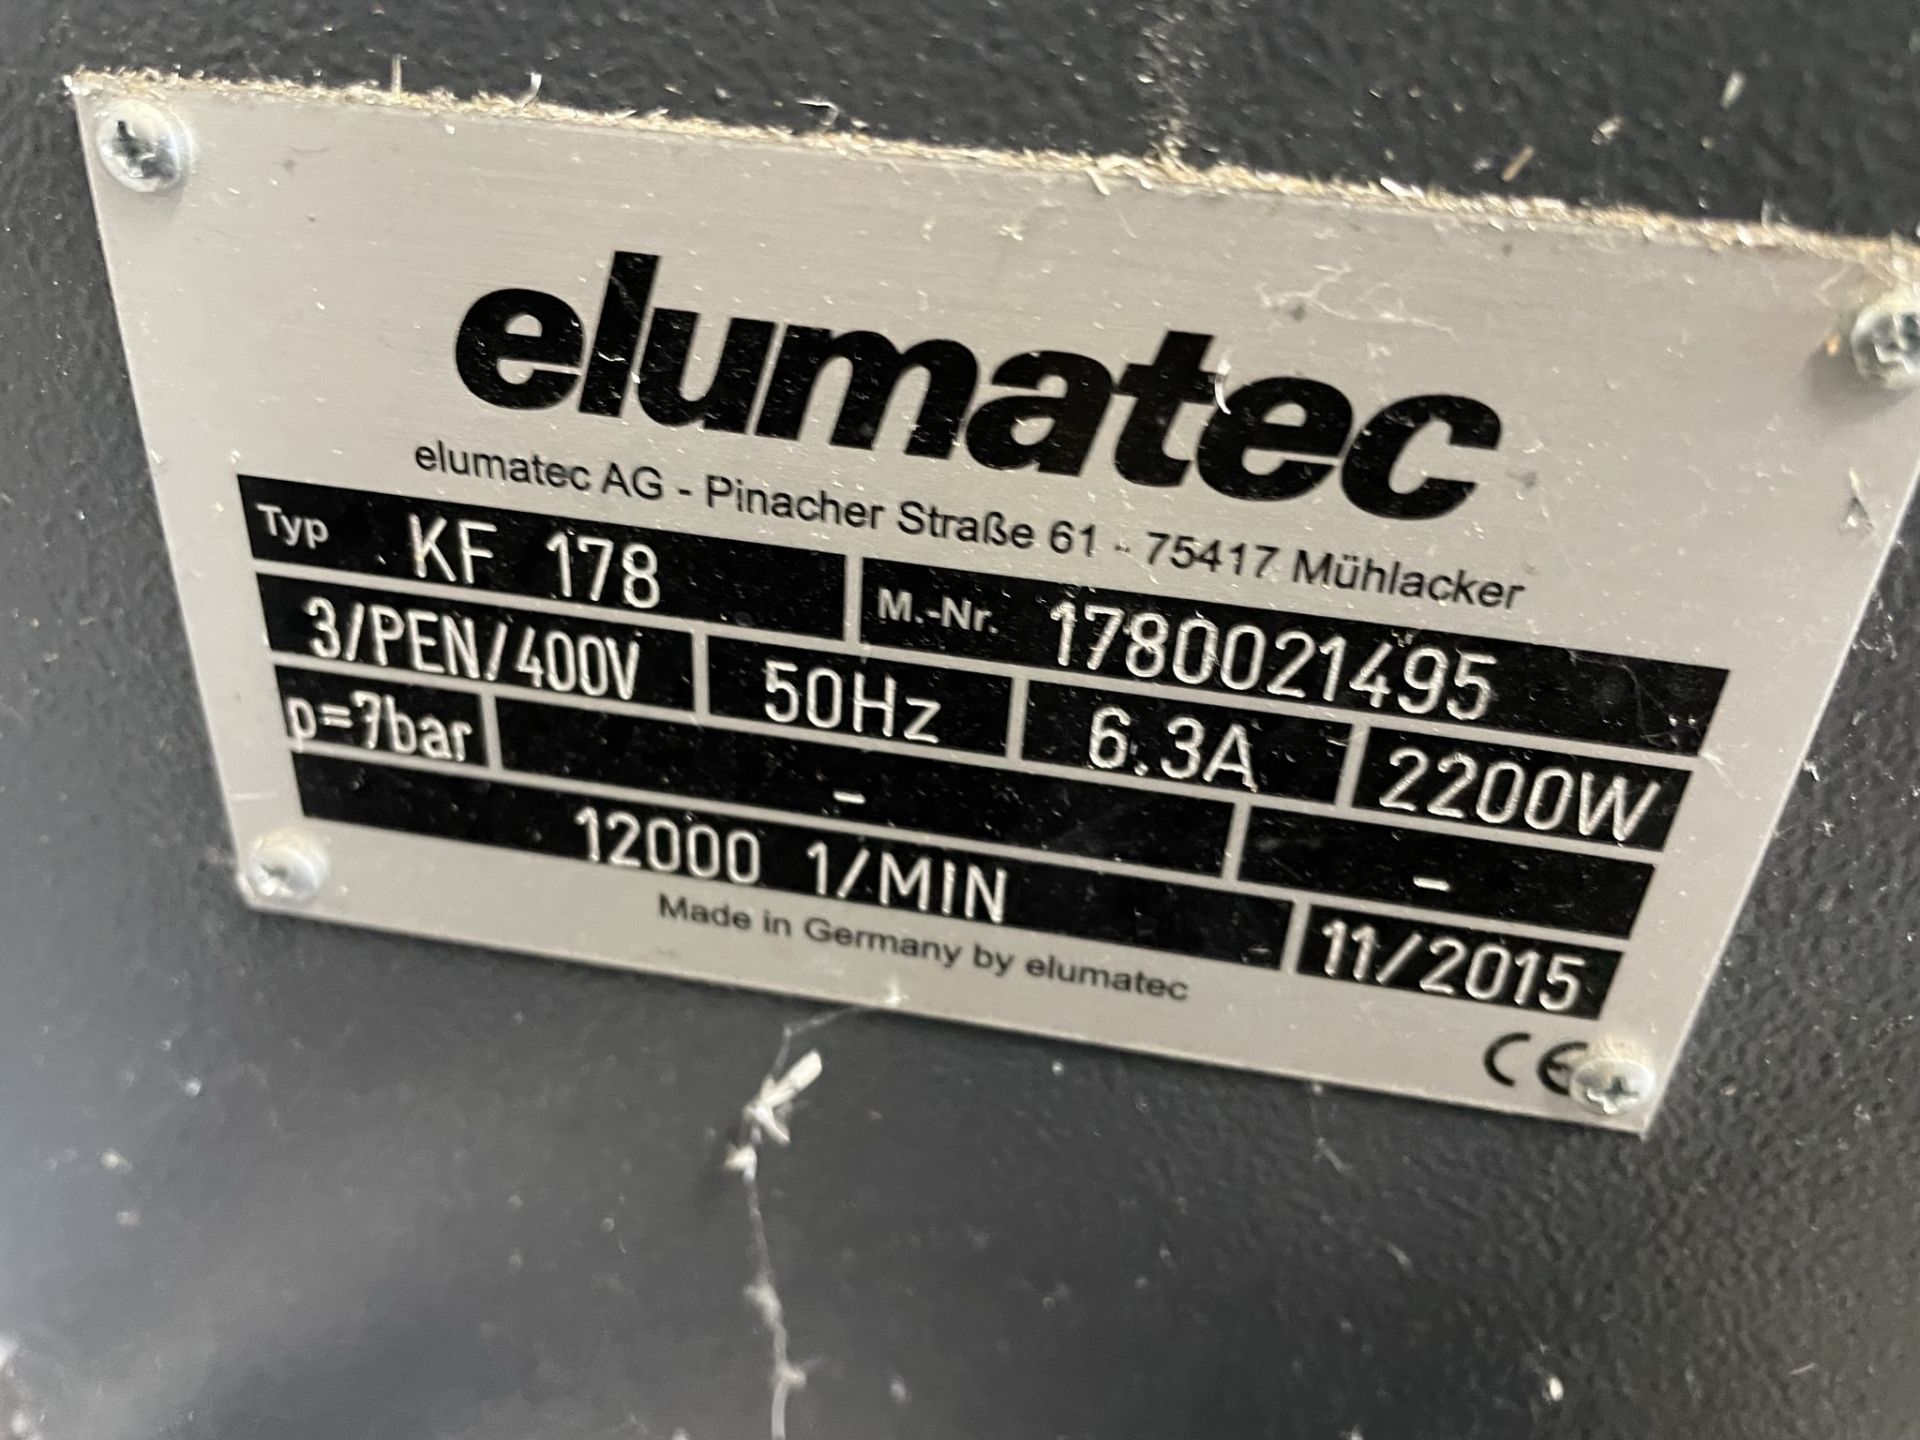 Elumatec, KF178 three head copy router, Serial No. 1780021495 (DOM: 2015) with roller in and out - Image 6 of 6